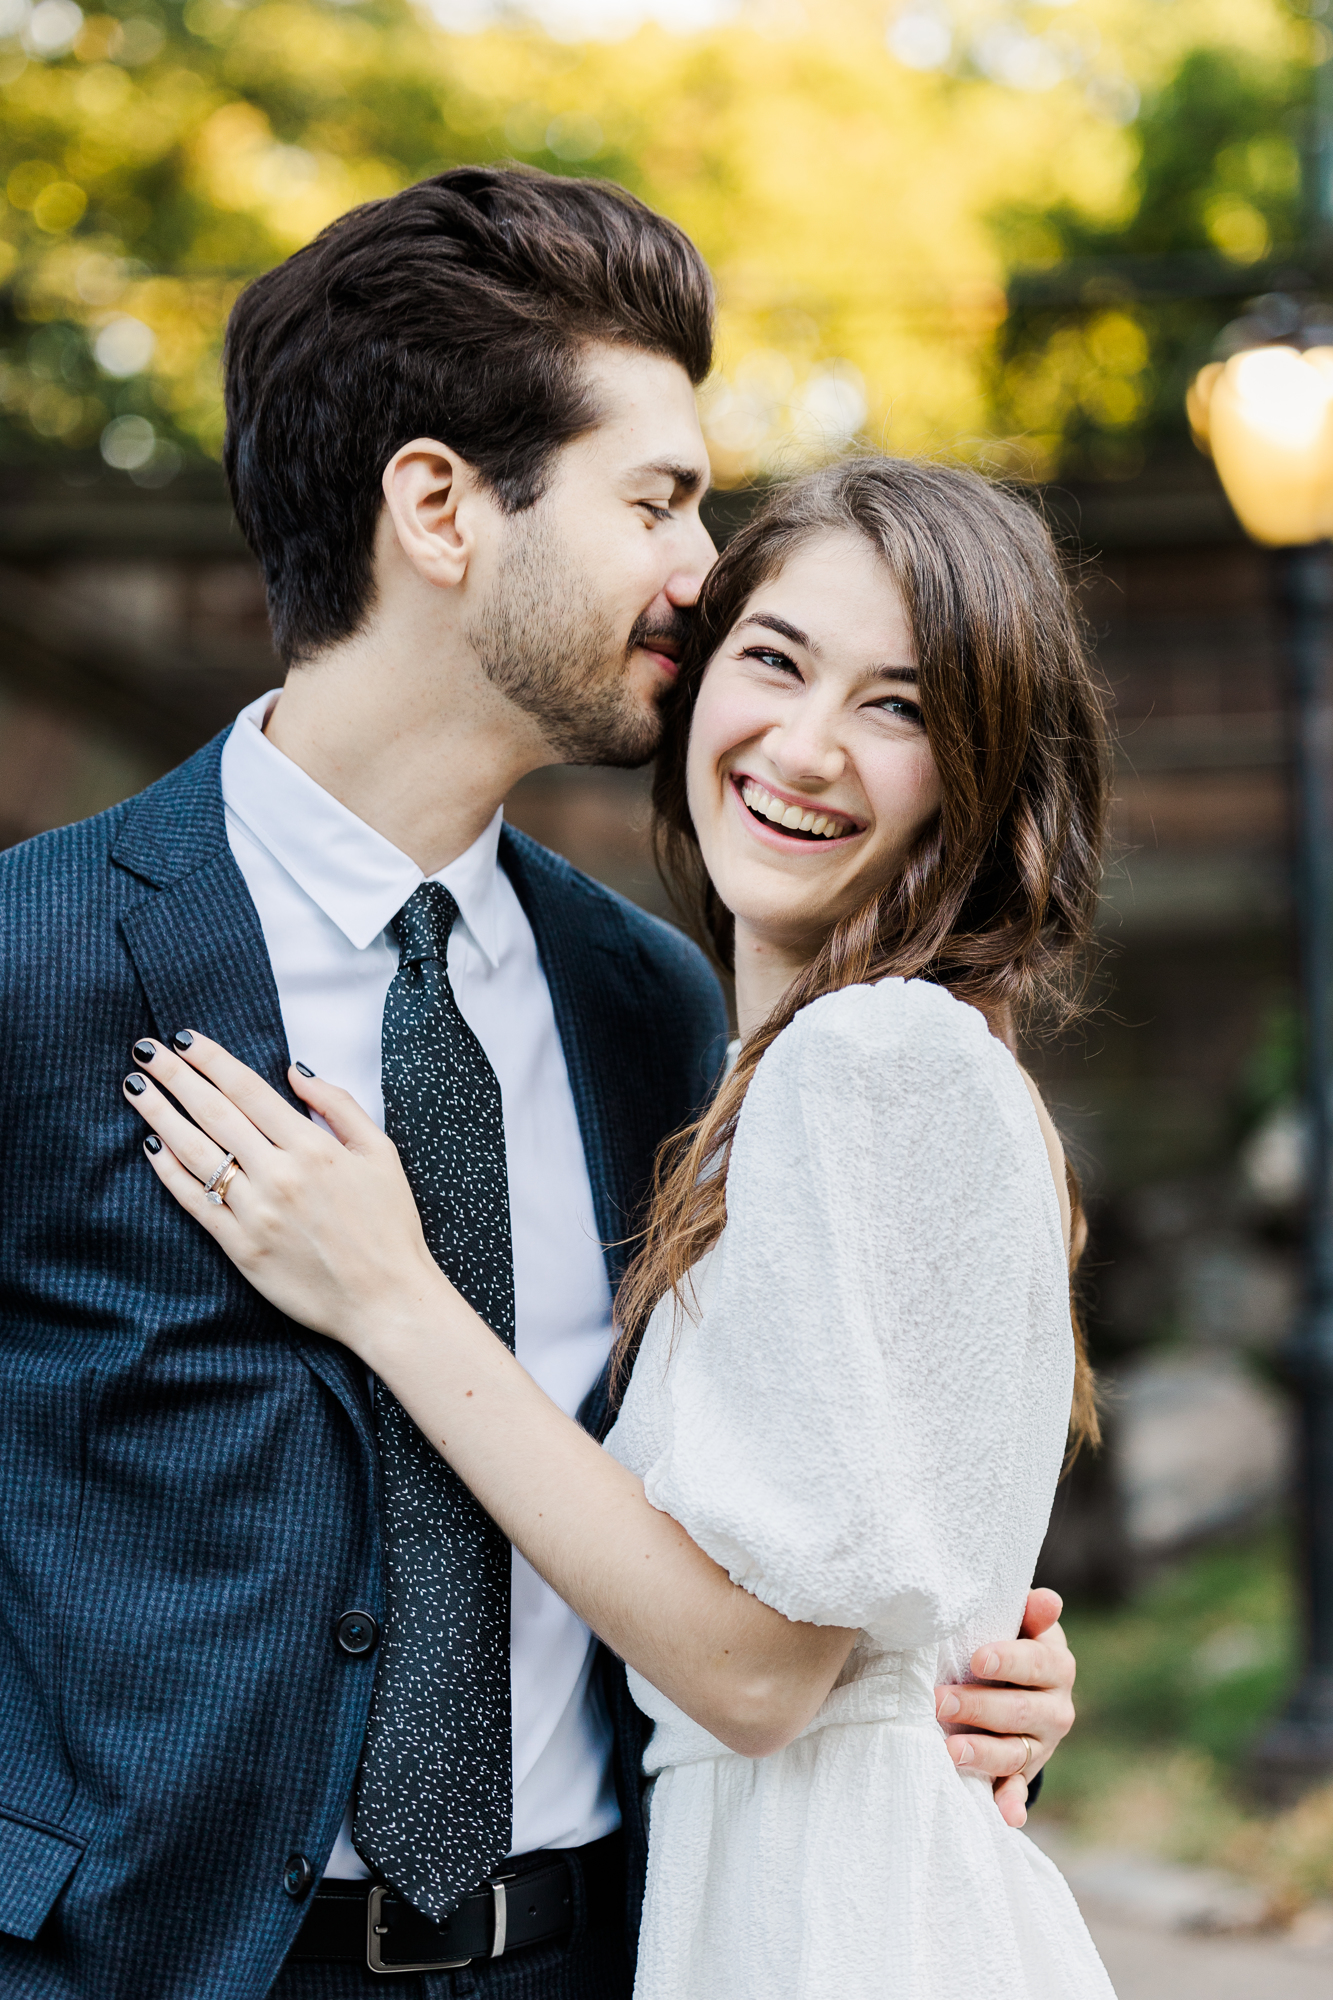 Cheerful Central Park Engagement Photos in NYC